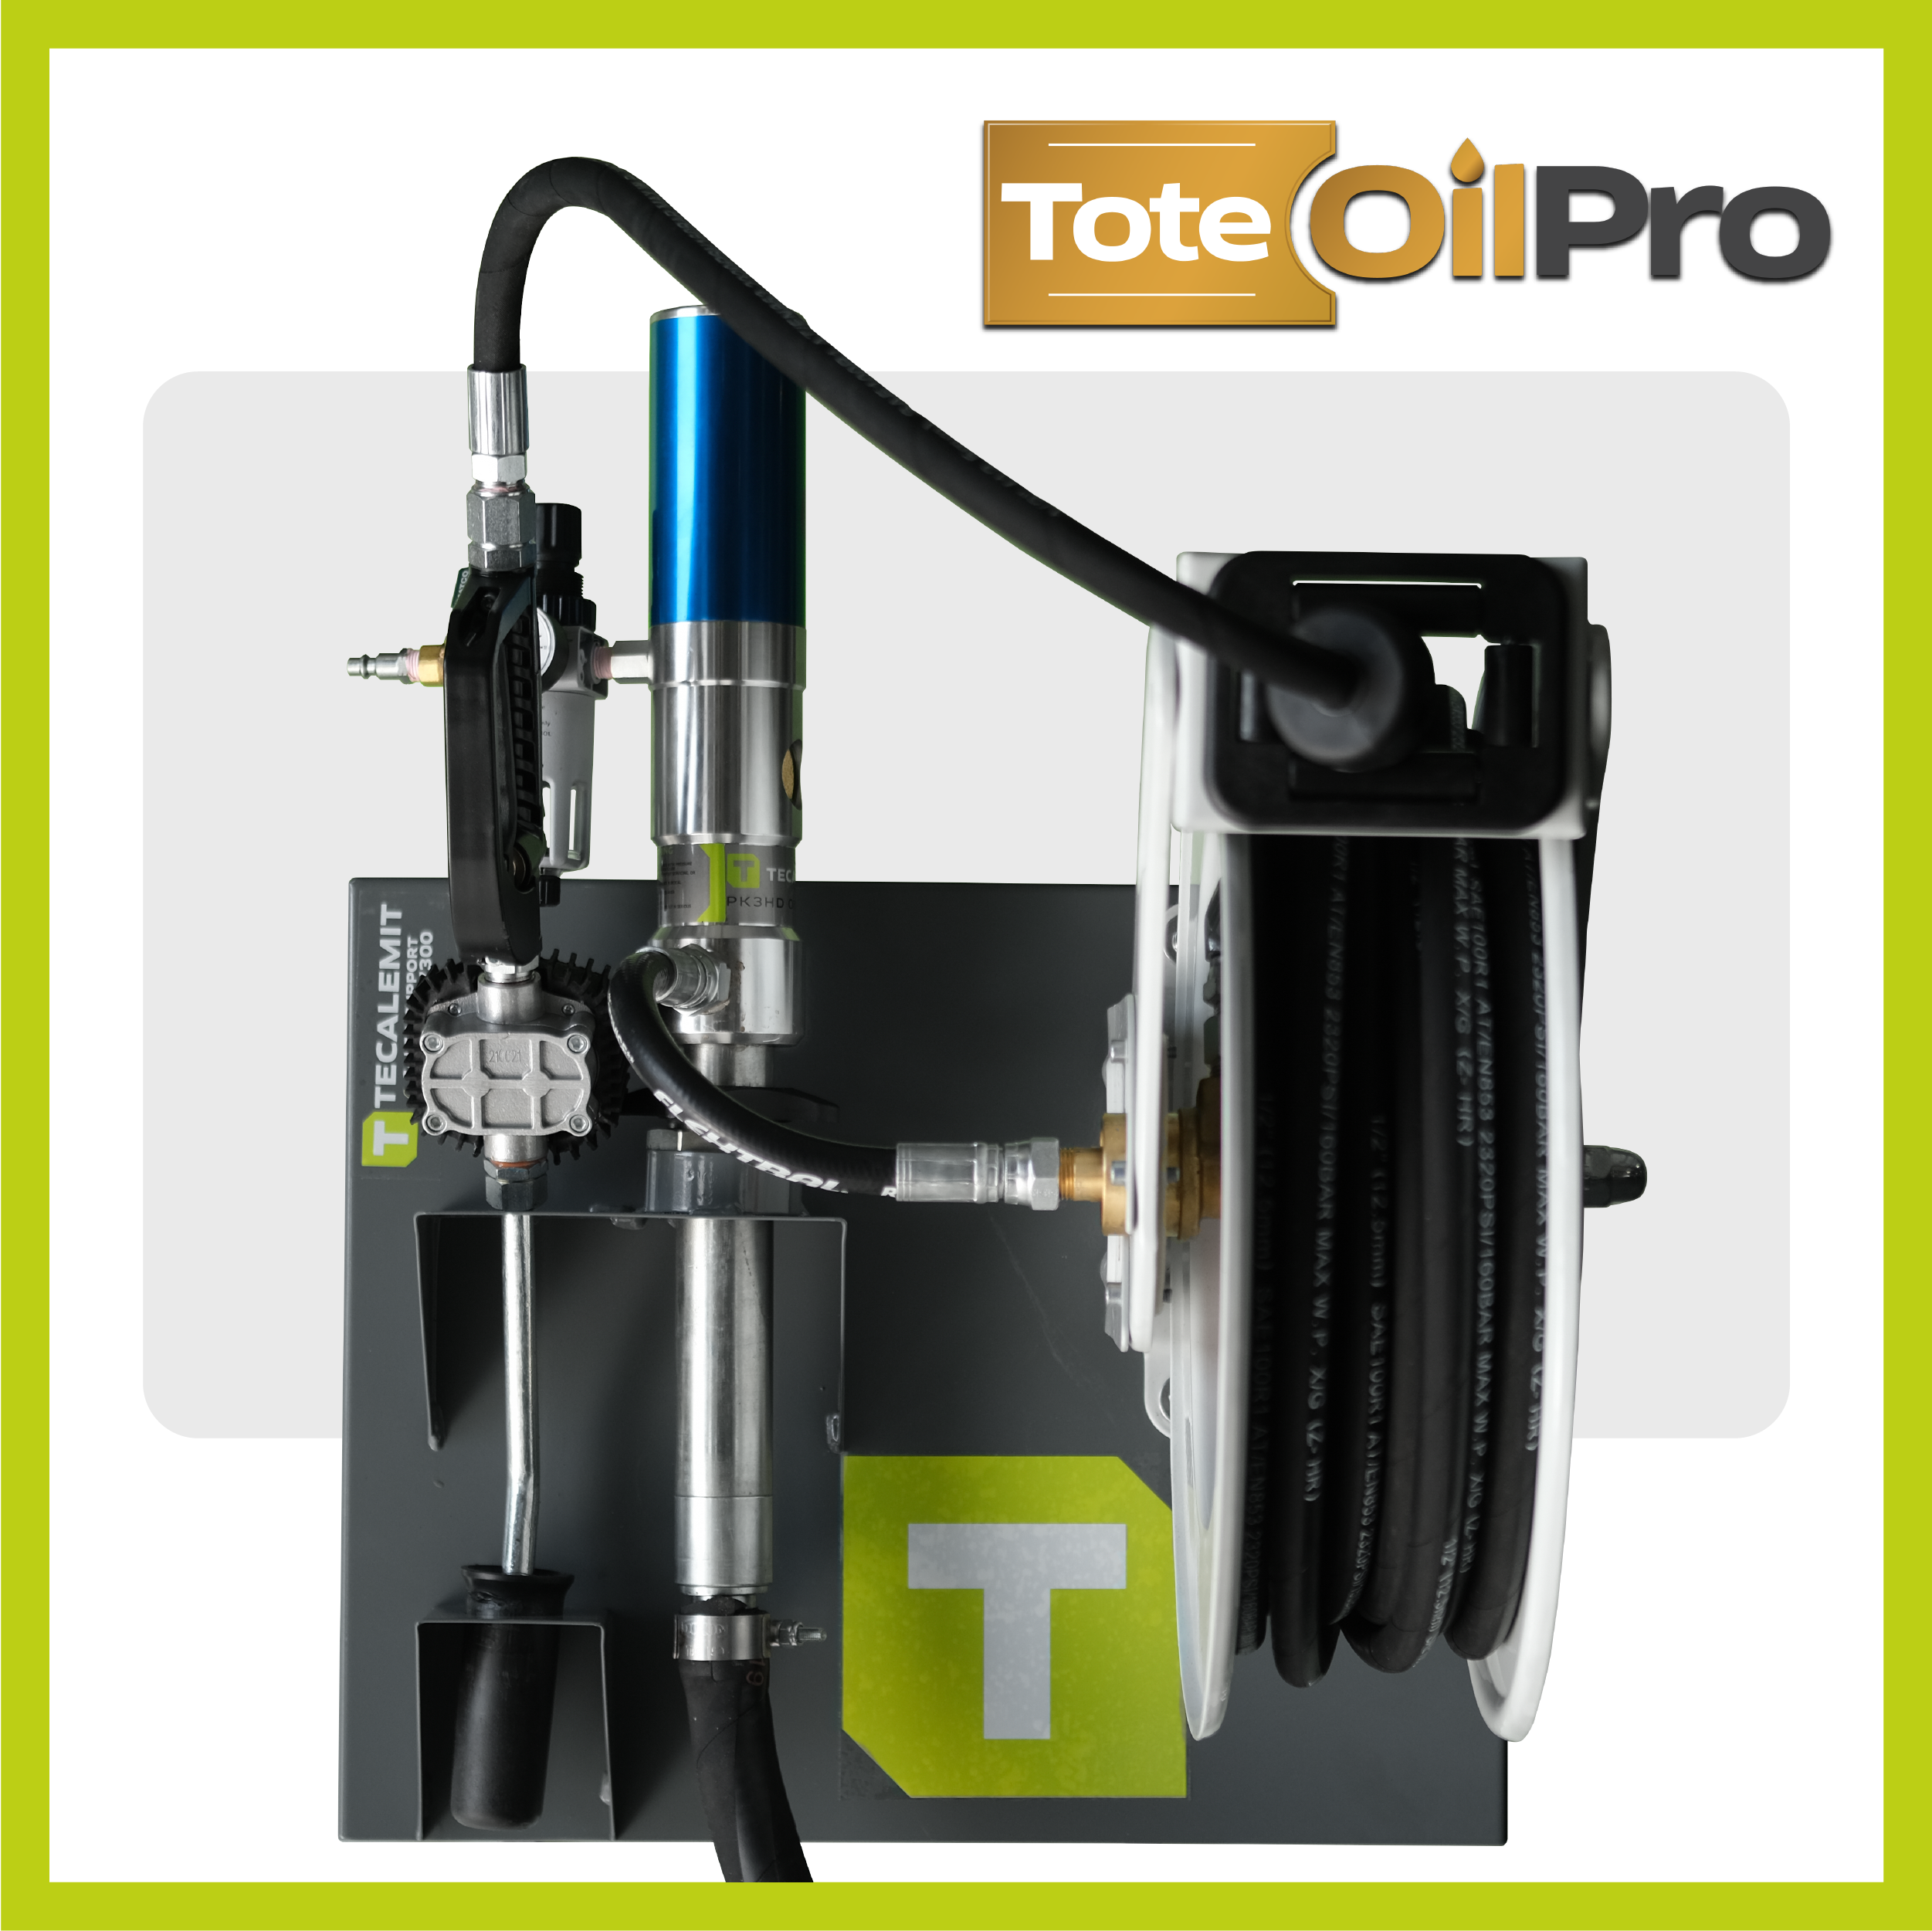 Tote OilPRO